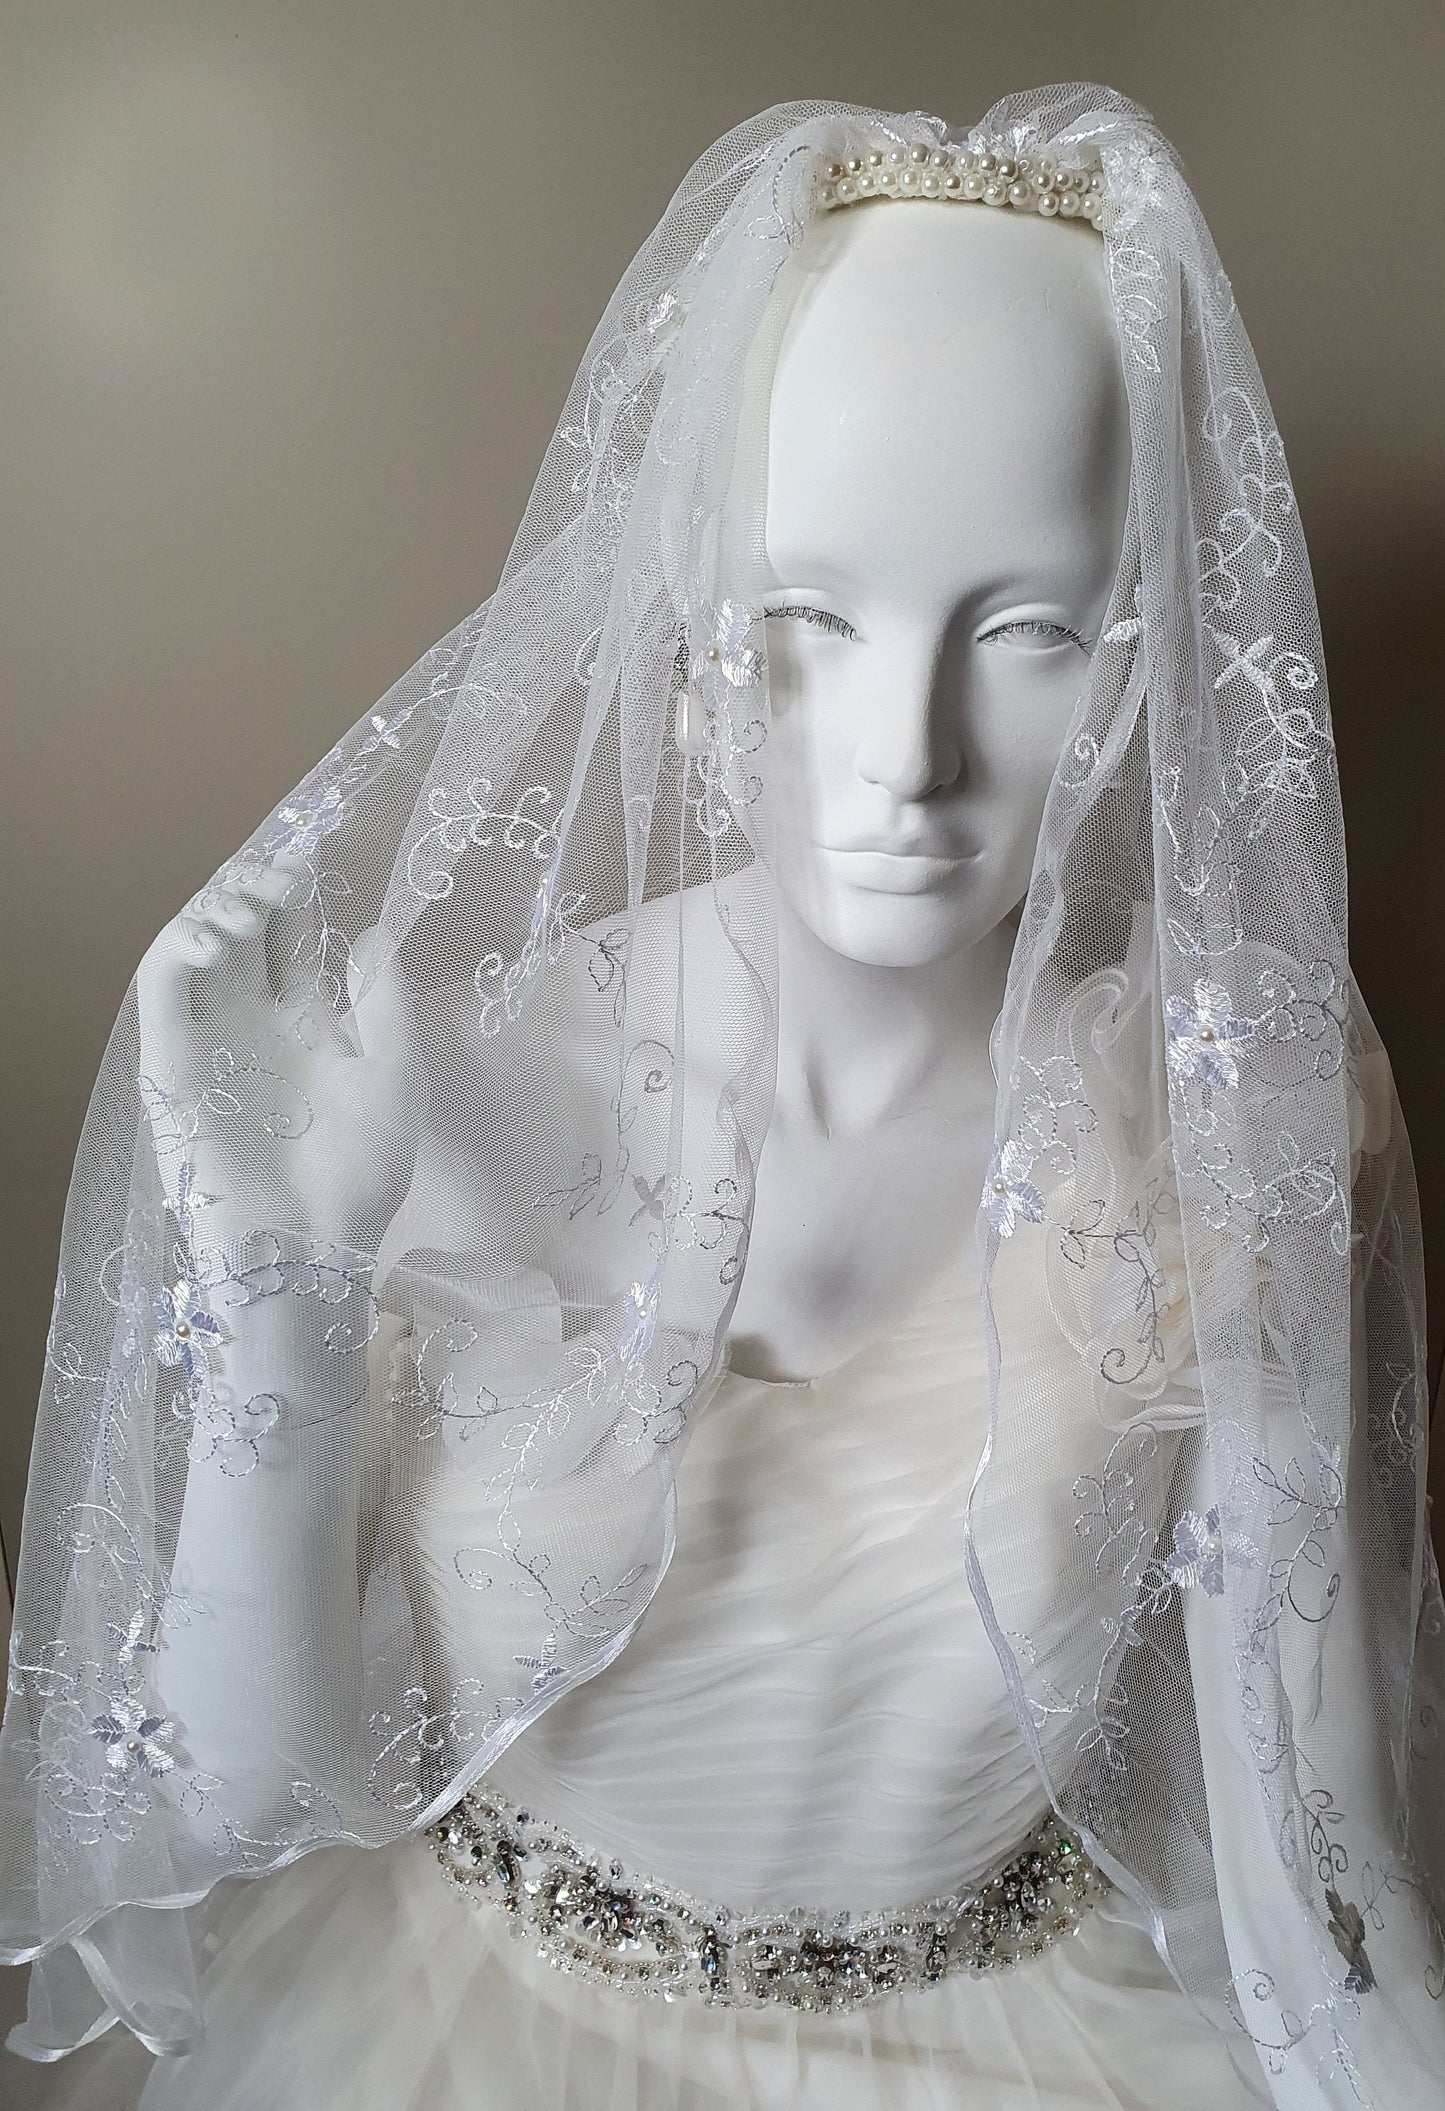 Handmade Lace Embroidered Bridal Veil, Comb with Pearls, Bridal Veil, Round Veil, Church Veil, Special Wedding Event